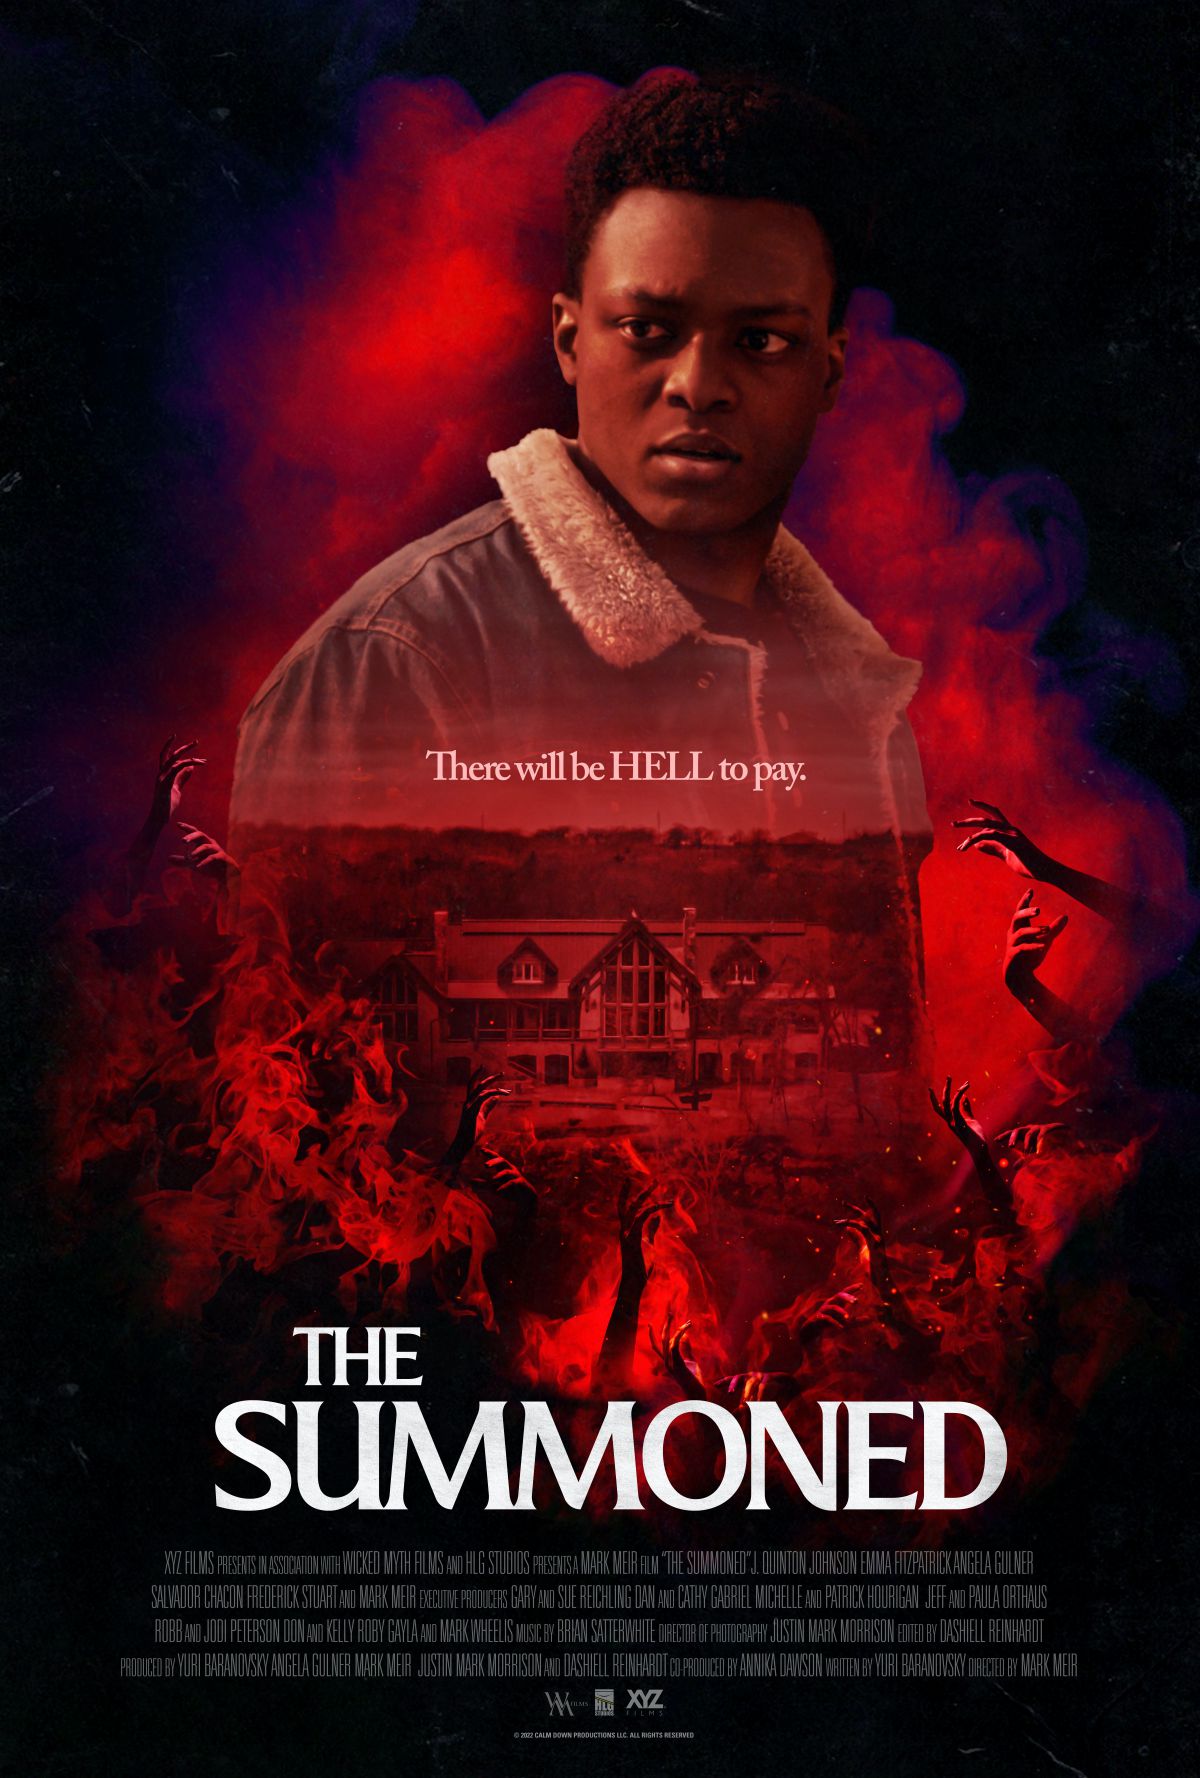 Poster of movie "The Summoned"